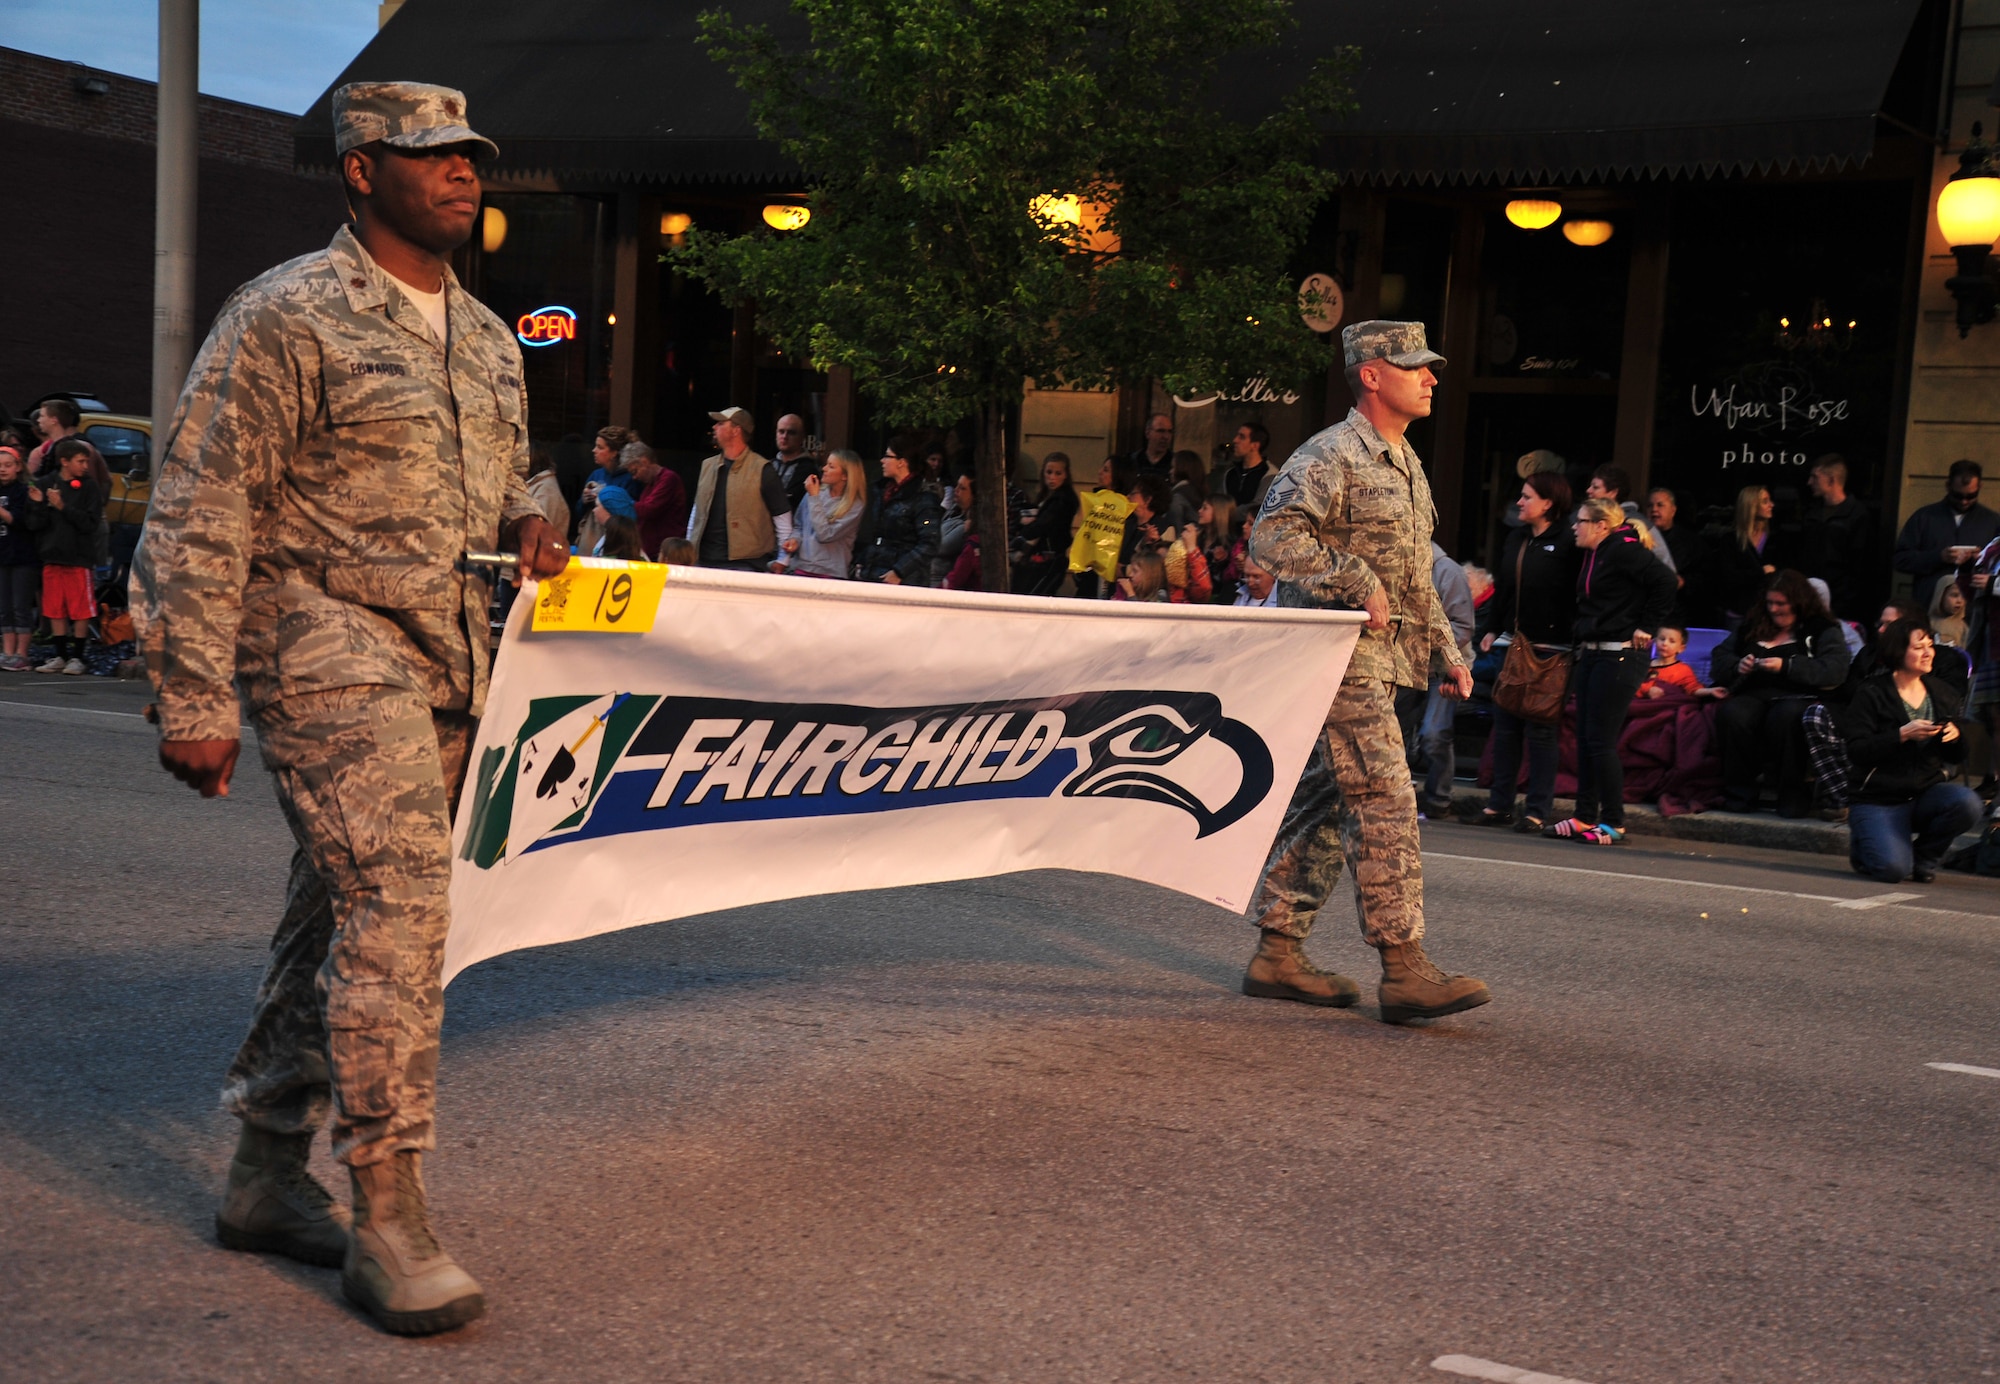 Airmen from Fairchild Air Force Base display a banner with the base’s logo during the Lilac Festival’s Armed Forces Torchlight Parade in Spokane, Wash., May 18, 2013. The parade is considered the nation’s largest Torchlight Parade on Armed Forces Day. (U.S. Air Force photo by Senior Airman Taylor Curry)